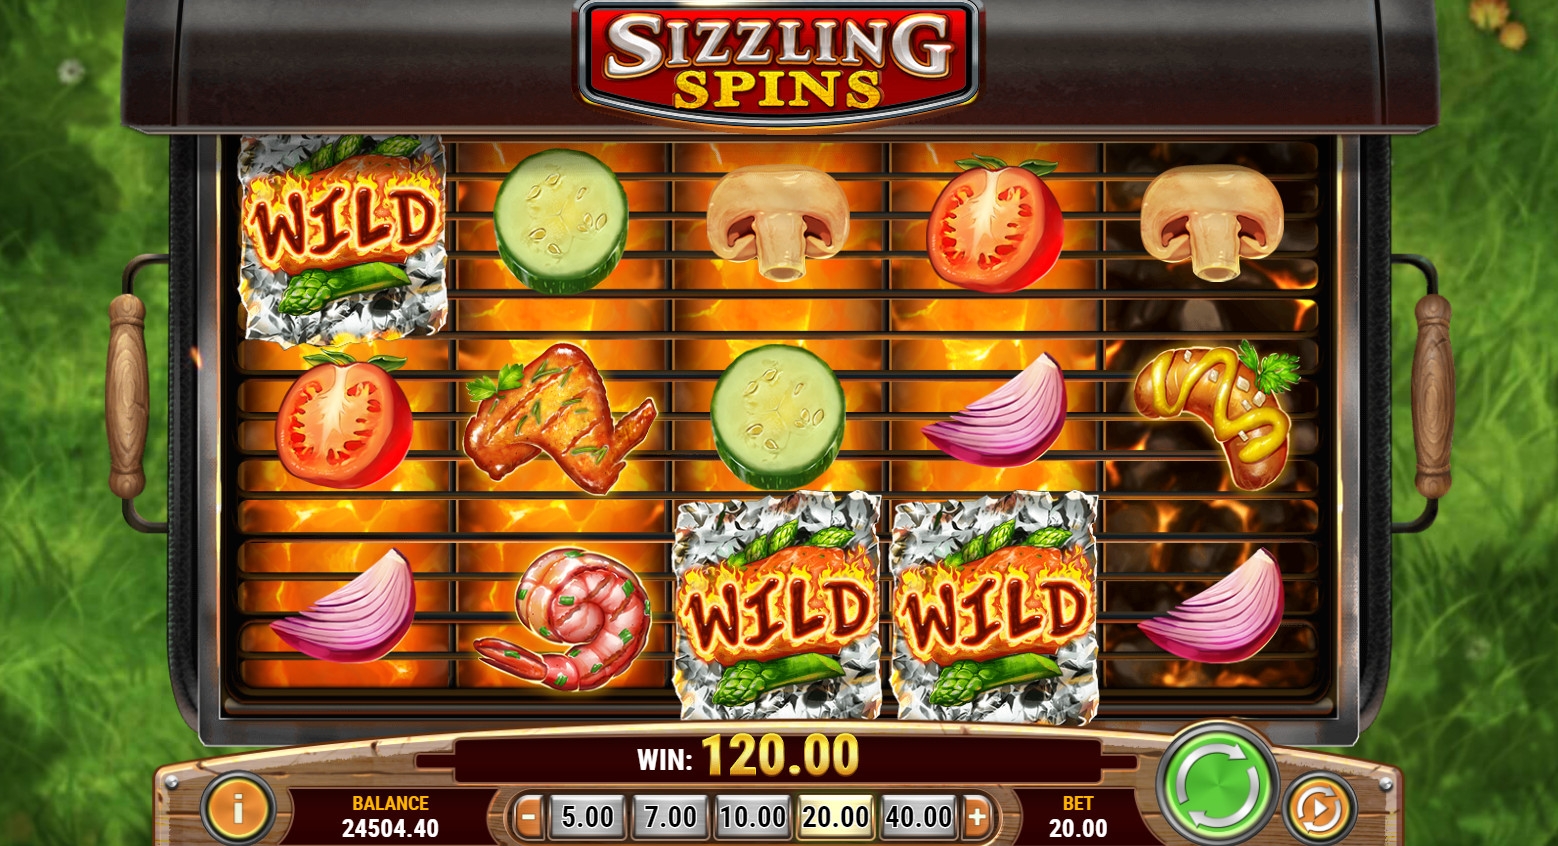 Sizzling Spins (Sizzling Spins) from category Slots